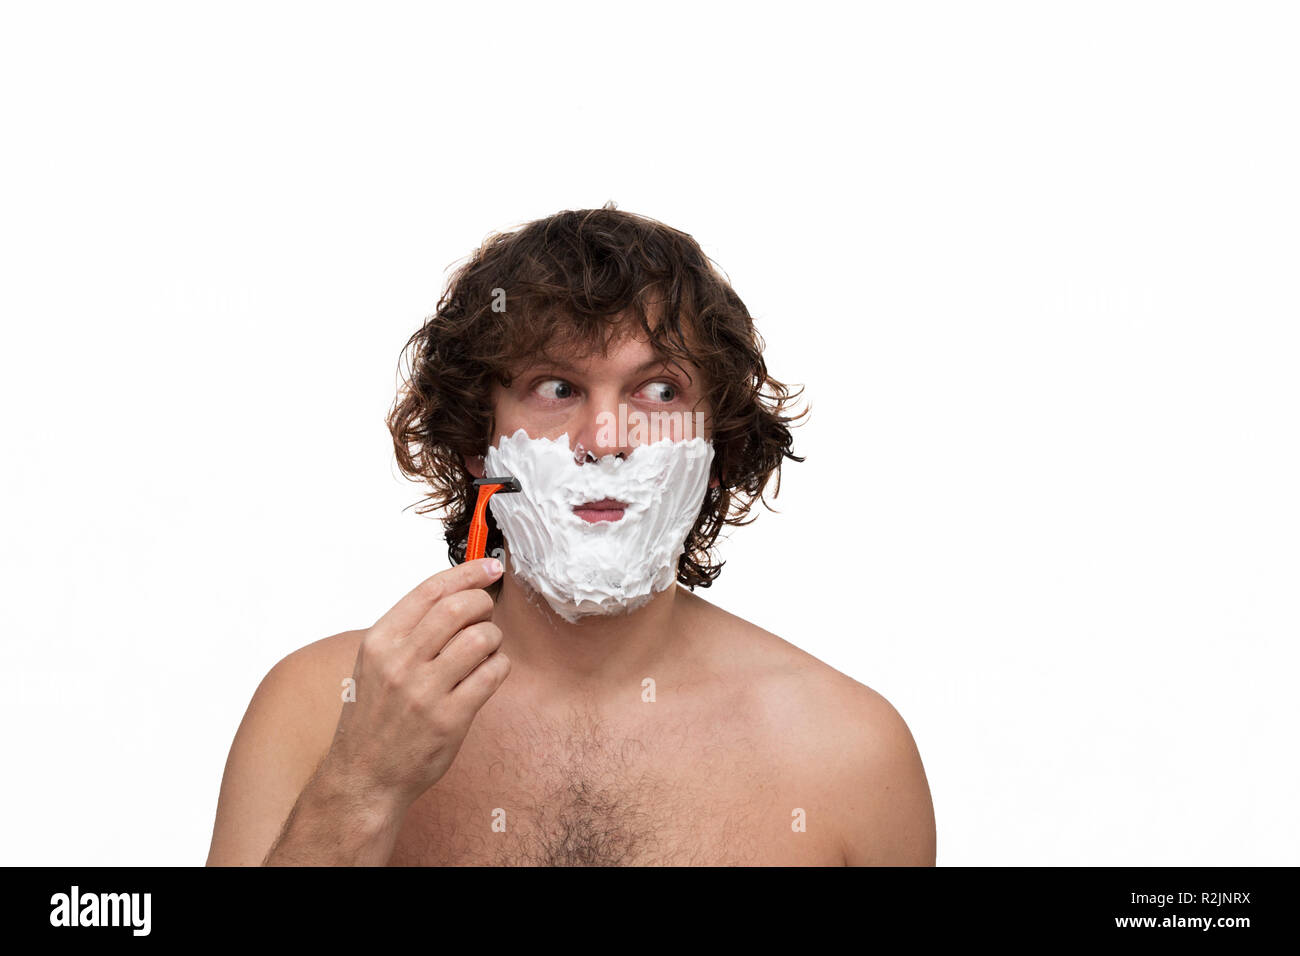 Handsome man with dark wet curly hair shaving his beard with a razor isolated on white. Close up portrait of a man distorts the facewith shaving foam. looking to the right. Copy space. Stock Photo